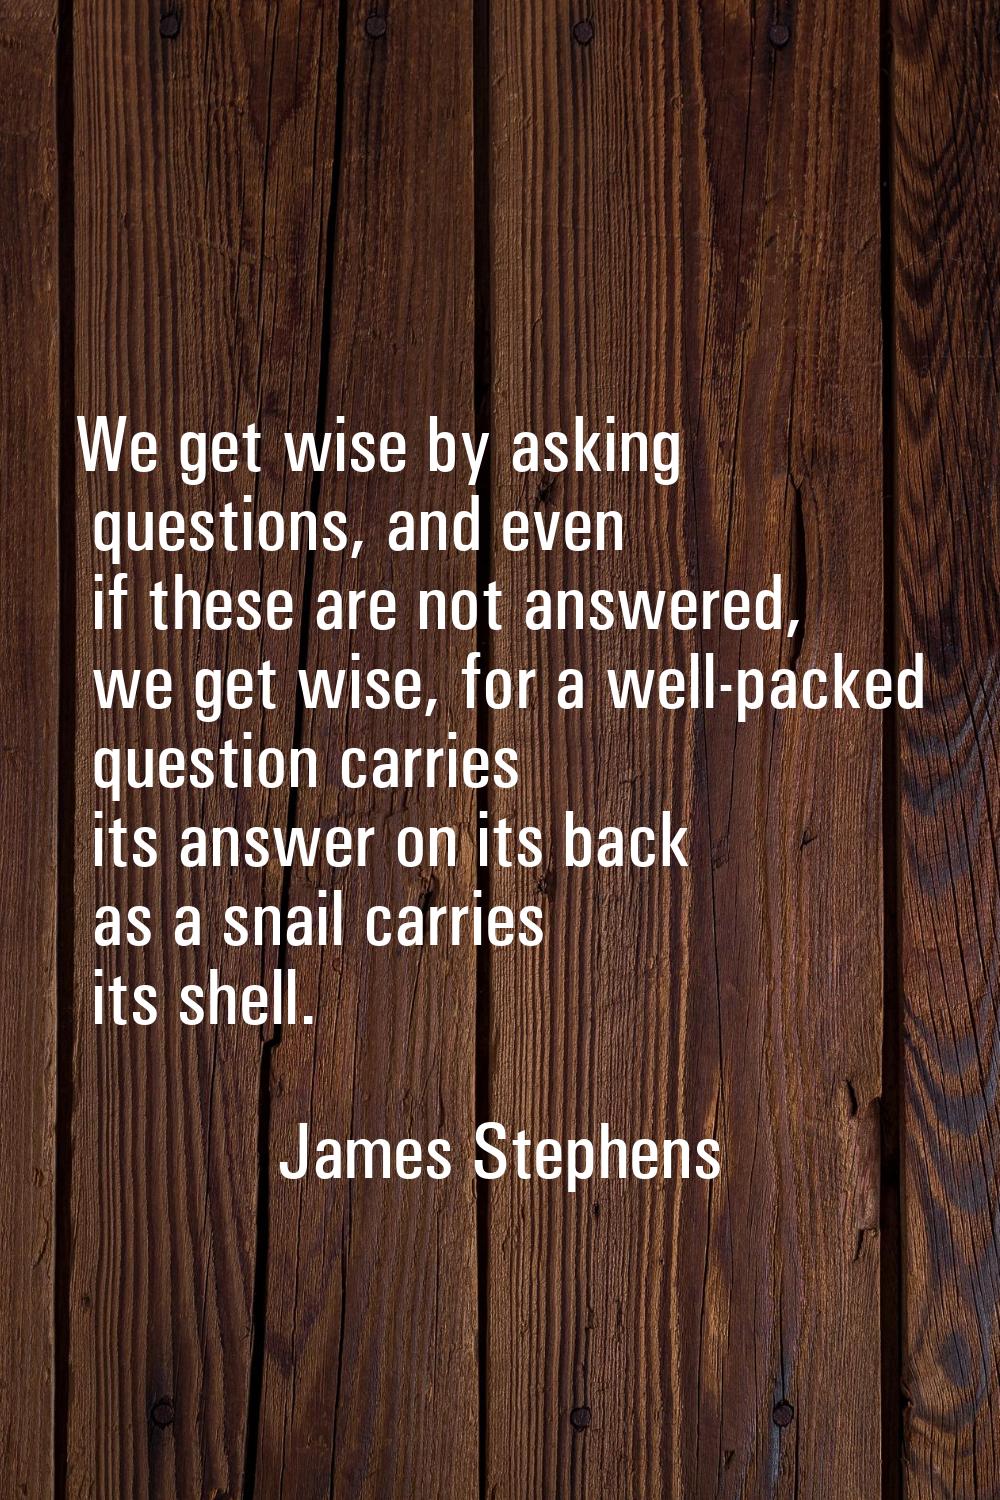 We get wise by asking questions, and even if these are not answered, we get wise, for a well-packed